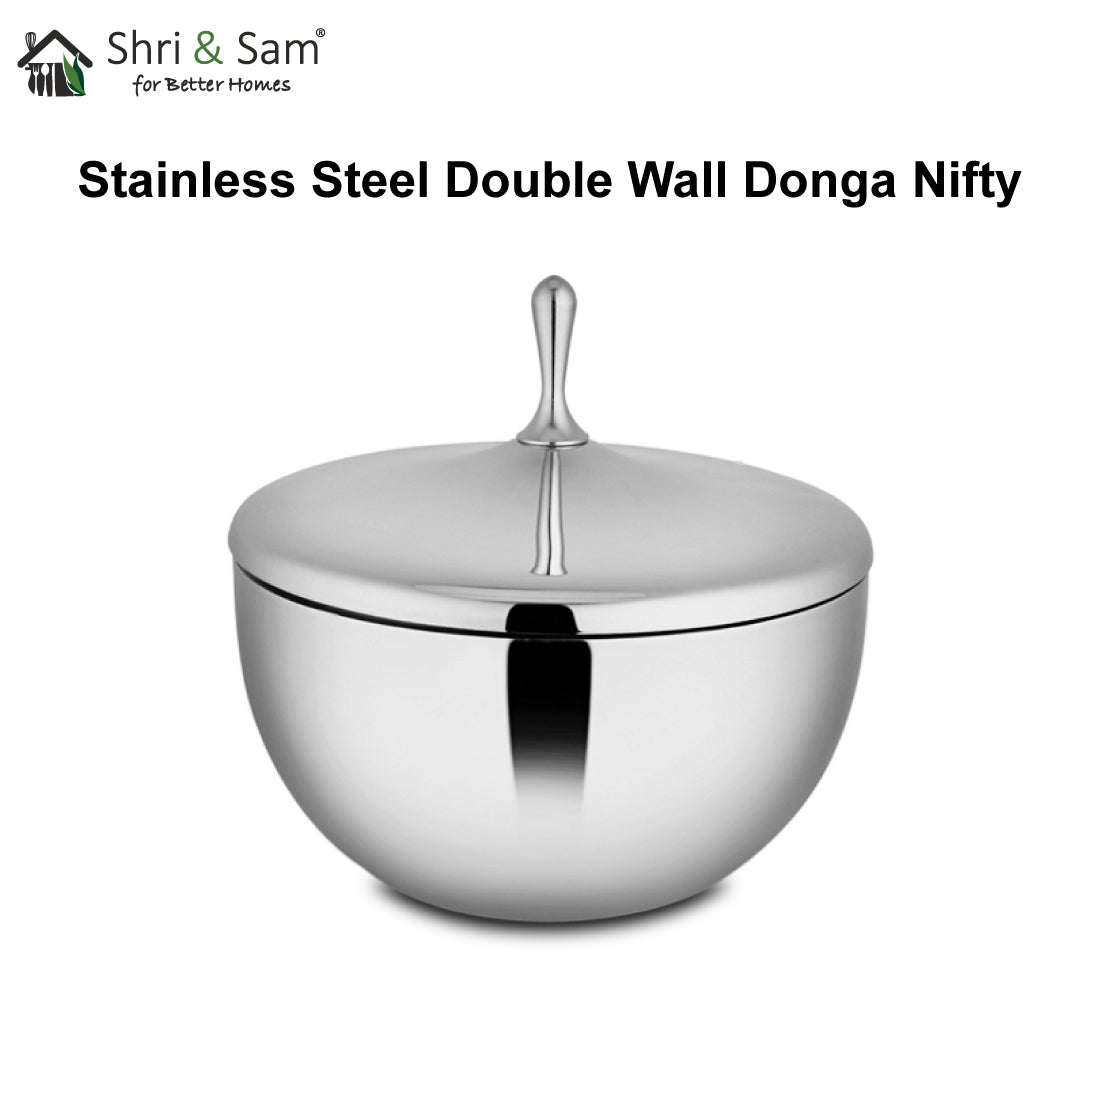 Stainless Steel Double Wall Donga Nifty